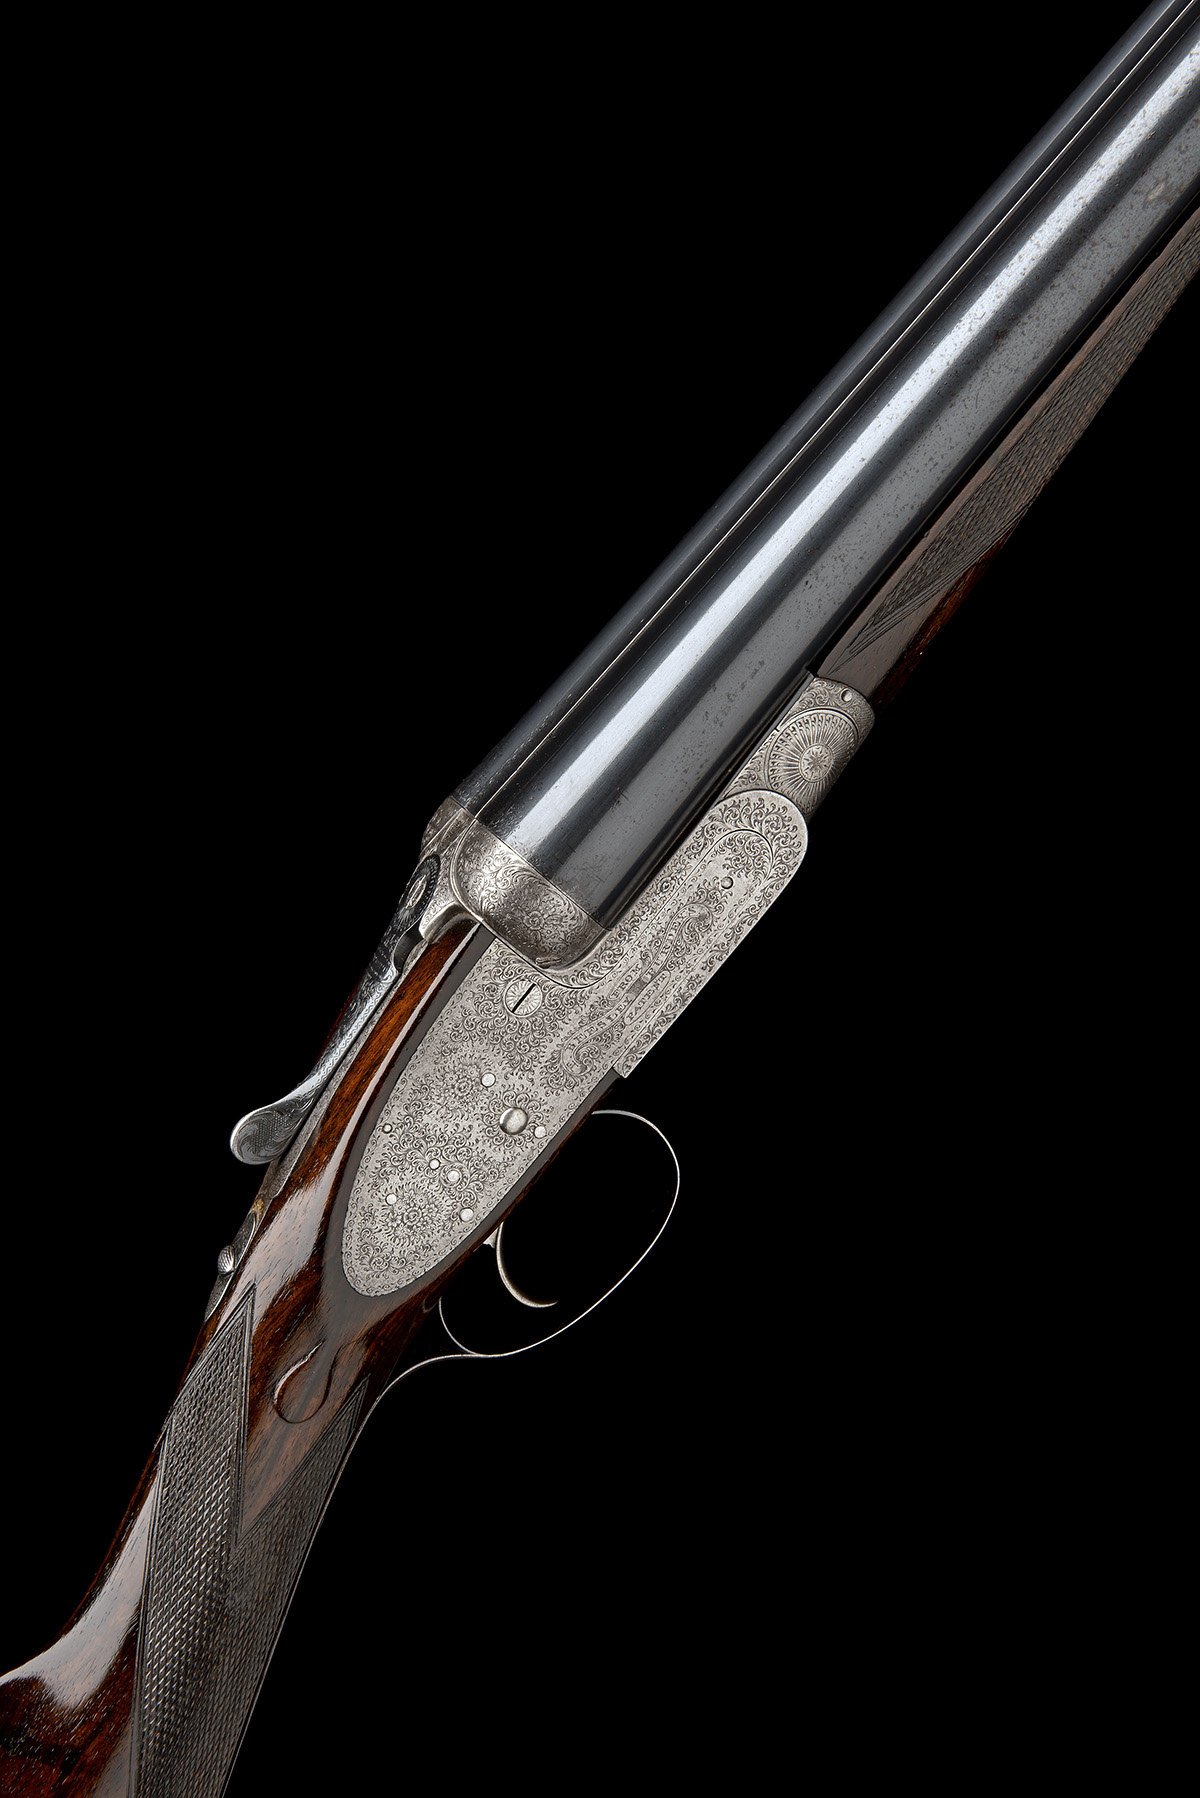 F. BEESLEY (FROM PURDEY'S) A 12-BORE GREEN PATENT SINGLE-TRIGGER SELF-OPENING SIDELOCK EJECTOR,